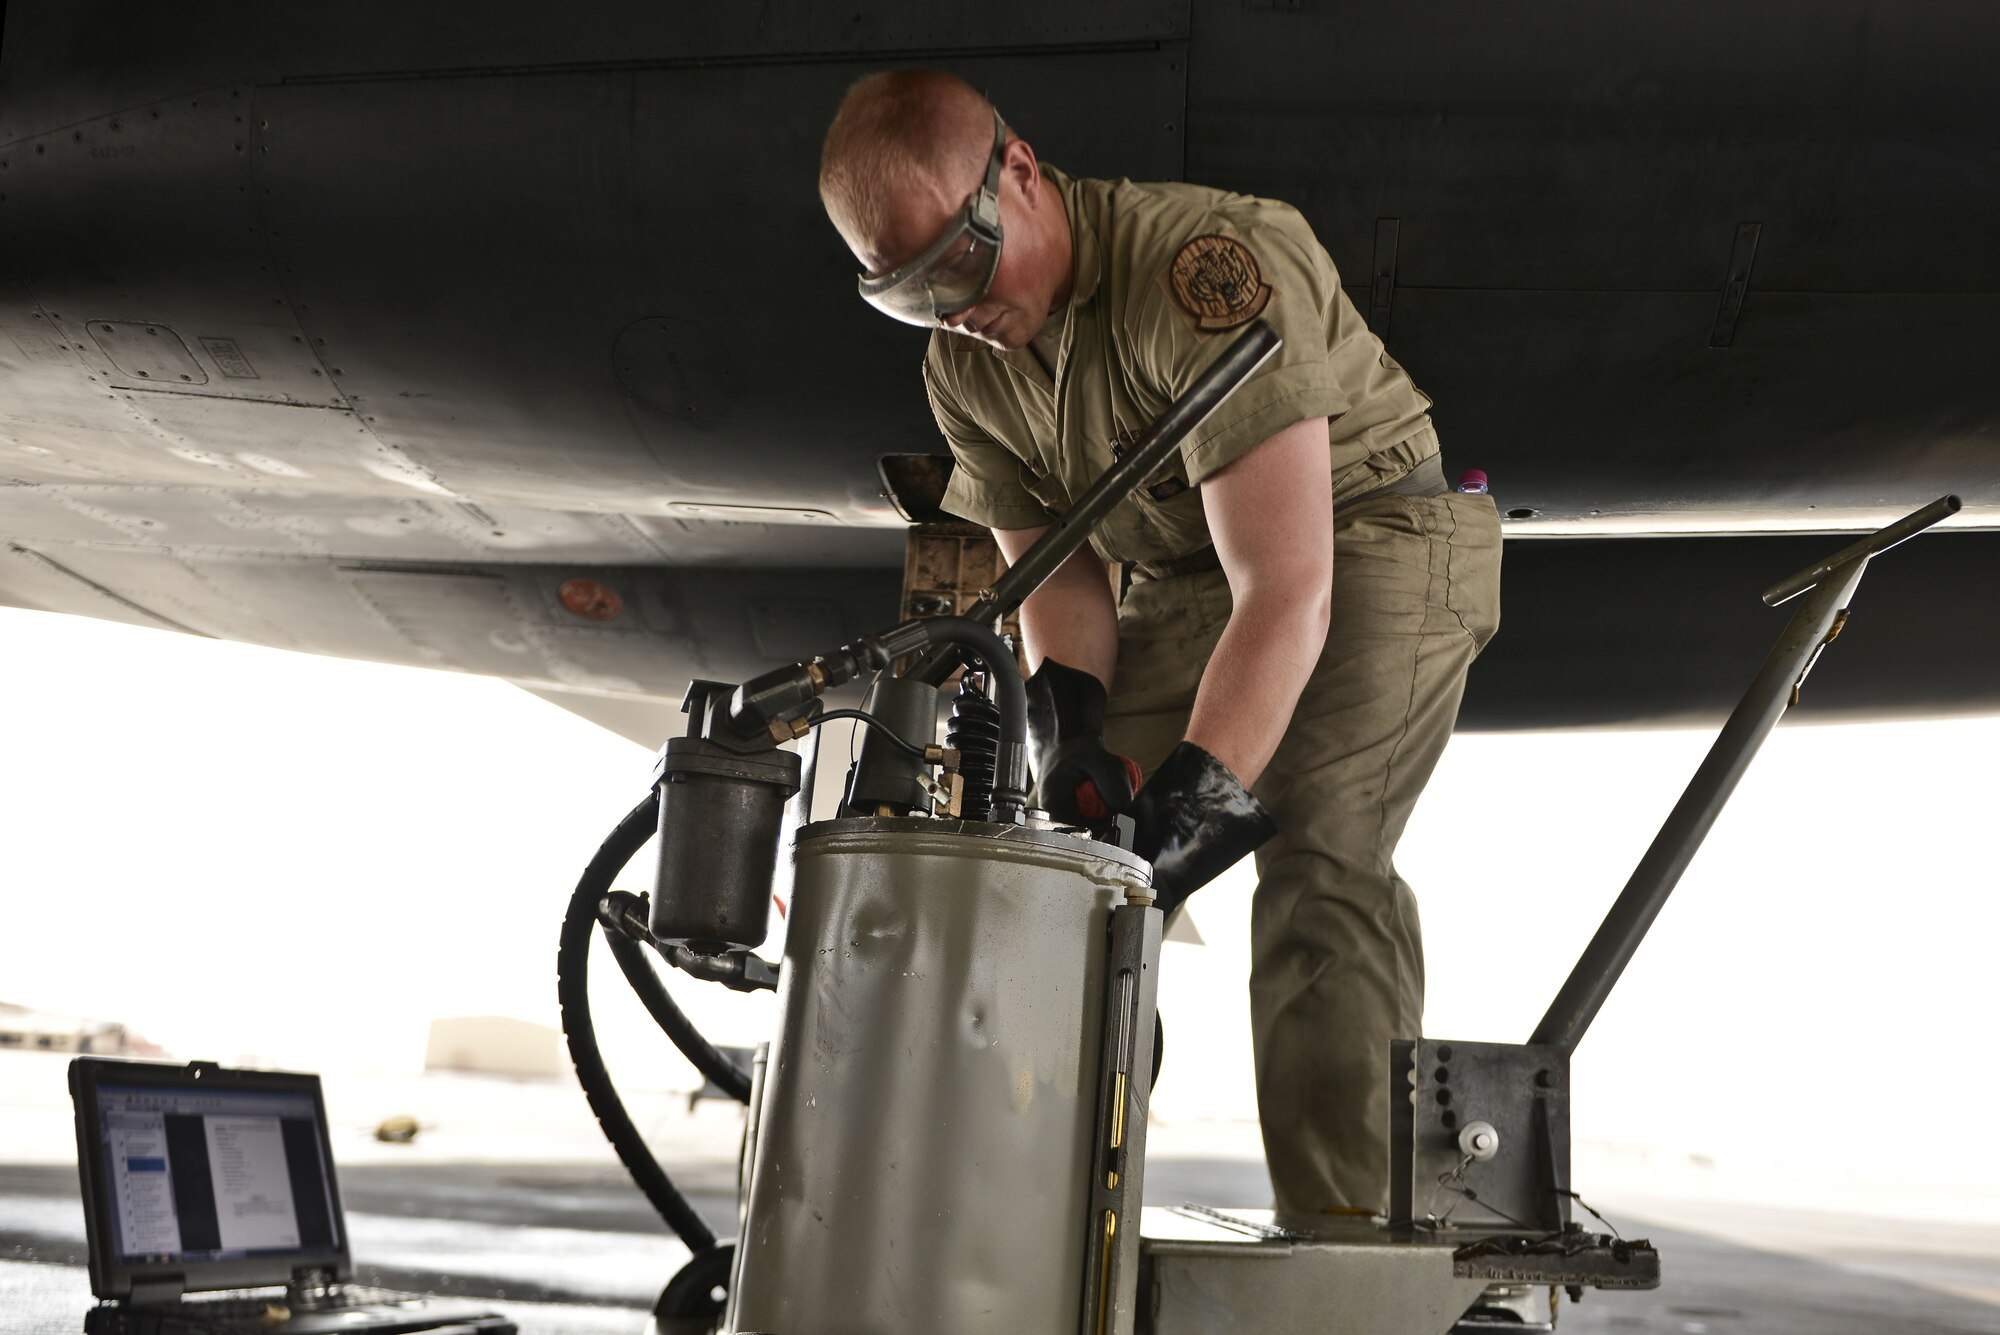 Airman 1st Class James, 28th Aircraft Maintenance Squadron crew chief, fills the auxiliary power unit of a B-1 bomber as part of his final inspections to ready the aircraft before an aircrew boards for a mission Sept. 22, 2015 at Al Udeid Air Base, Qatar. James was deployed to the area from Ellsworth Air Force Base, S.D. (U.S. Air Force photo by Staff Sgt. Alexandre Montes/Released)